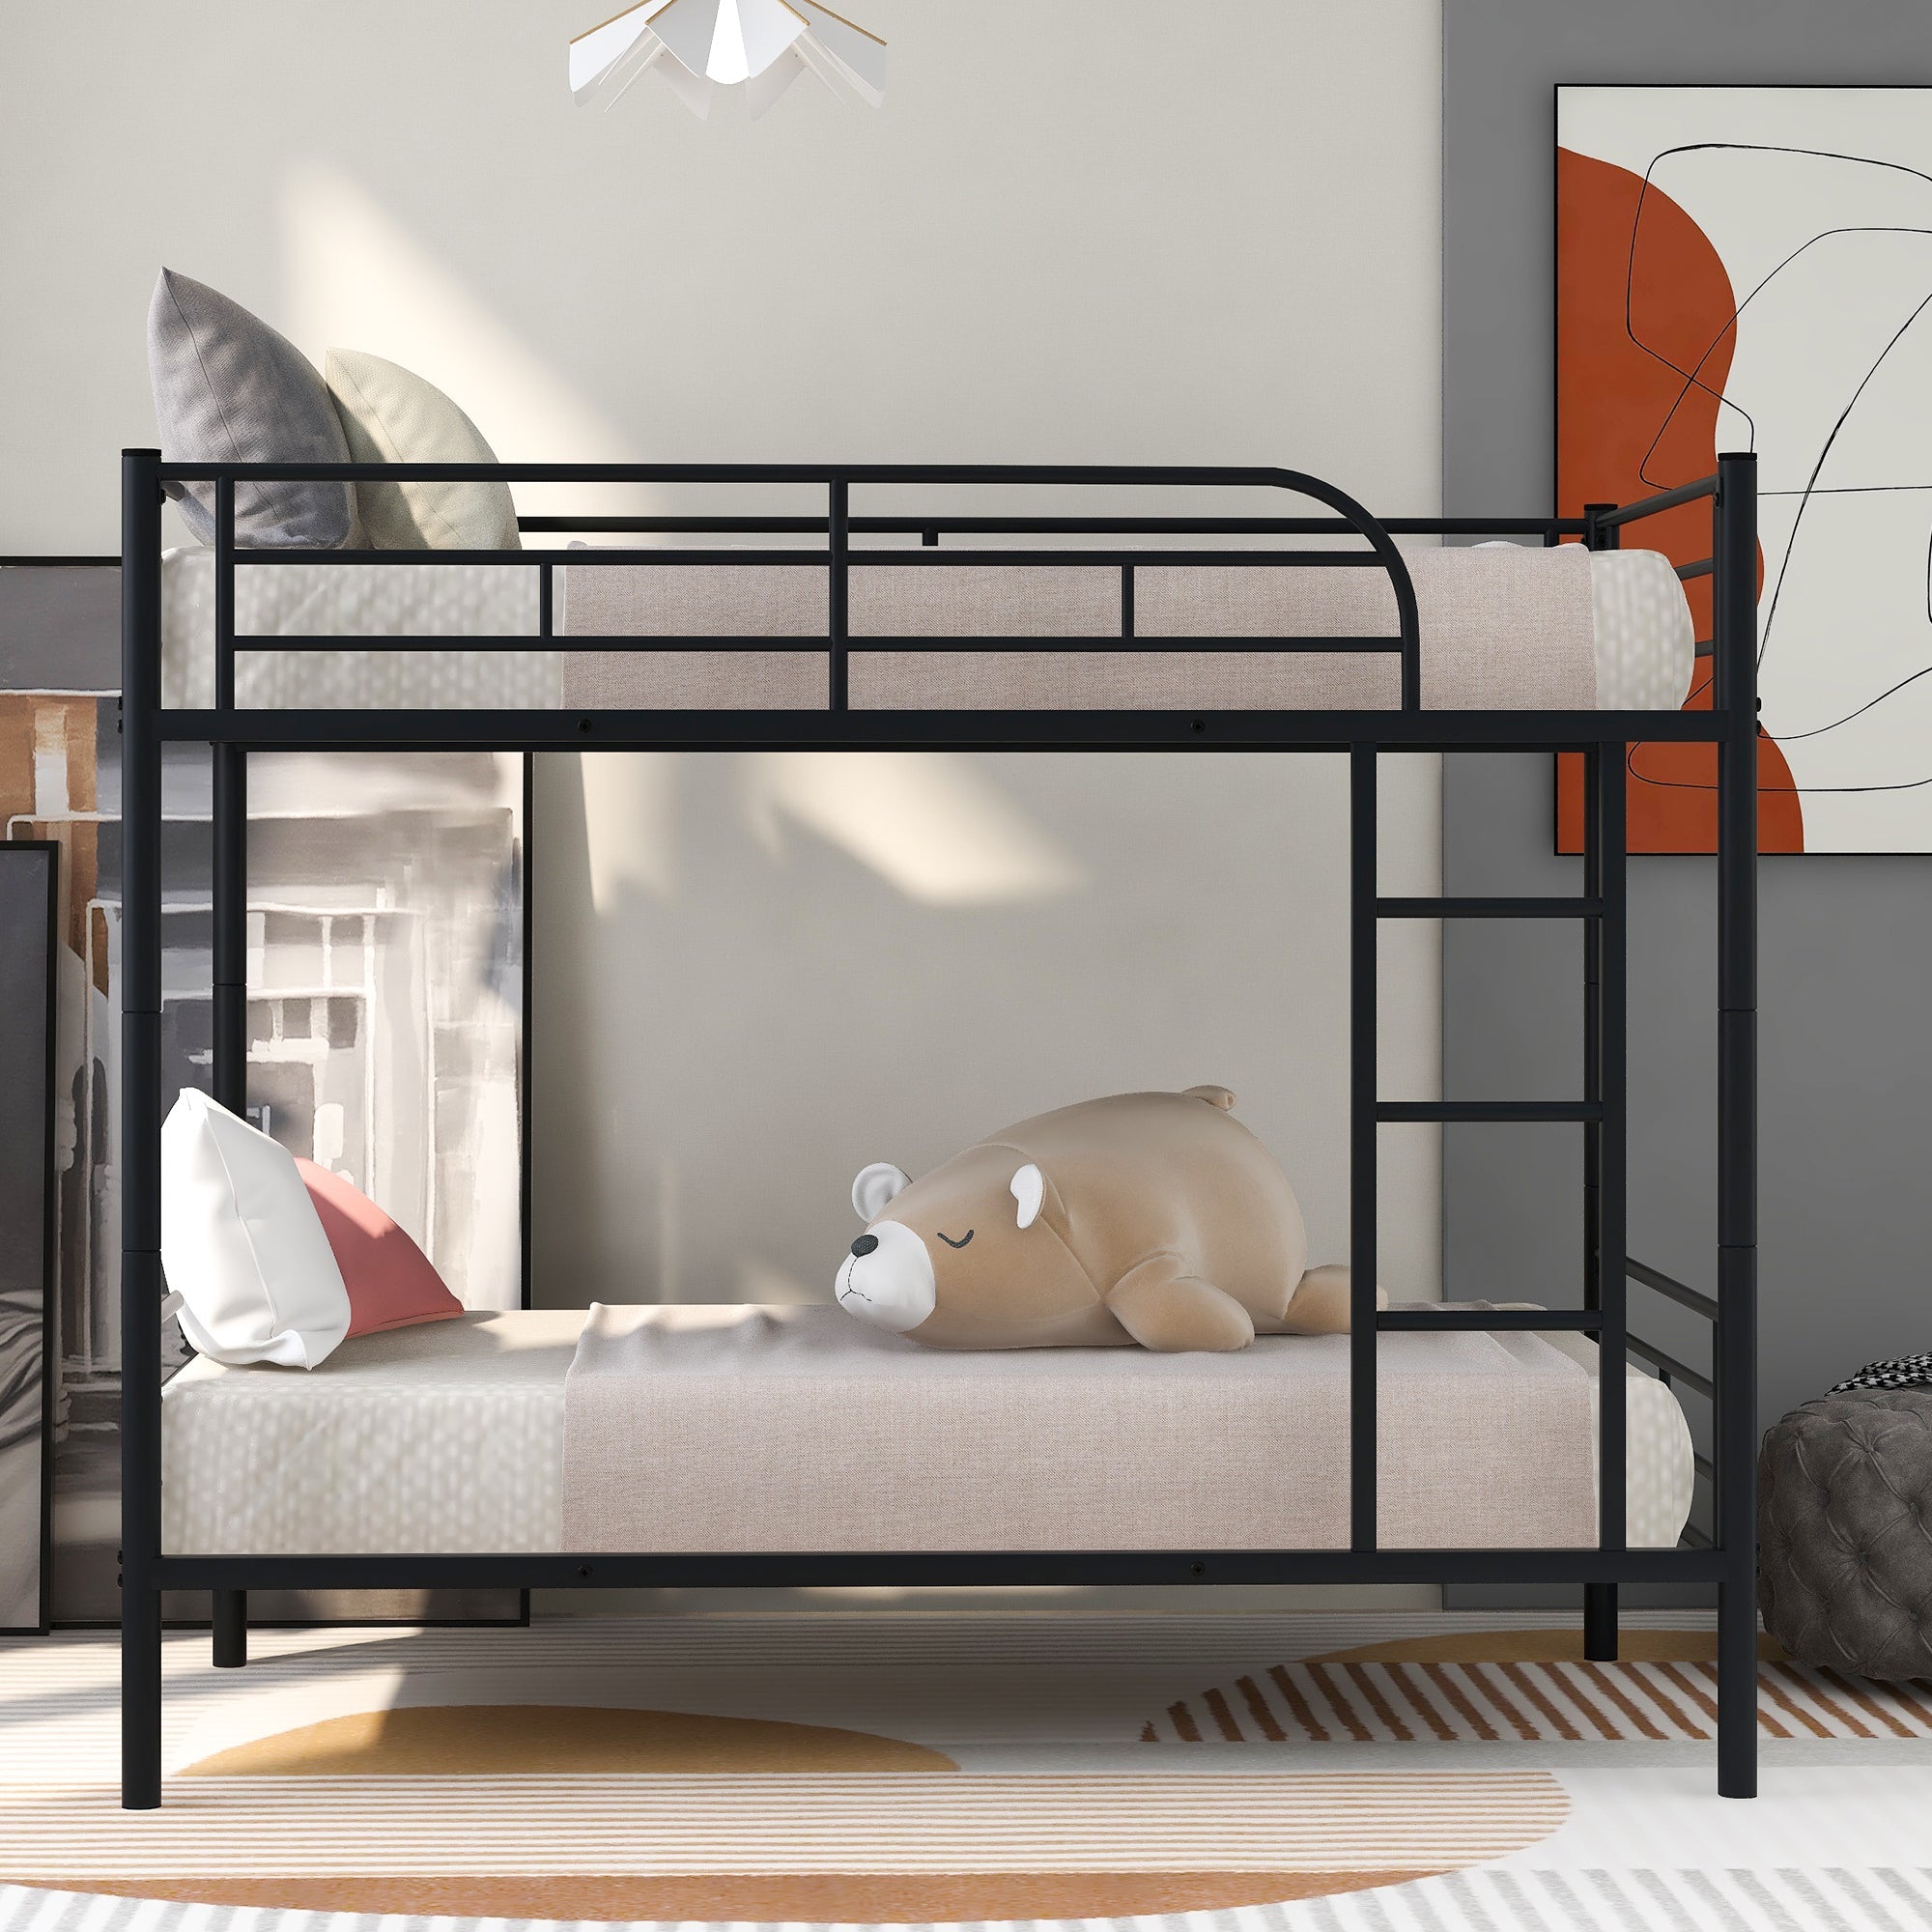 Twin Over Twin Metal Bunk Bed | Space-Saving | Sturdy Construction | Black Finish